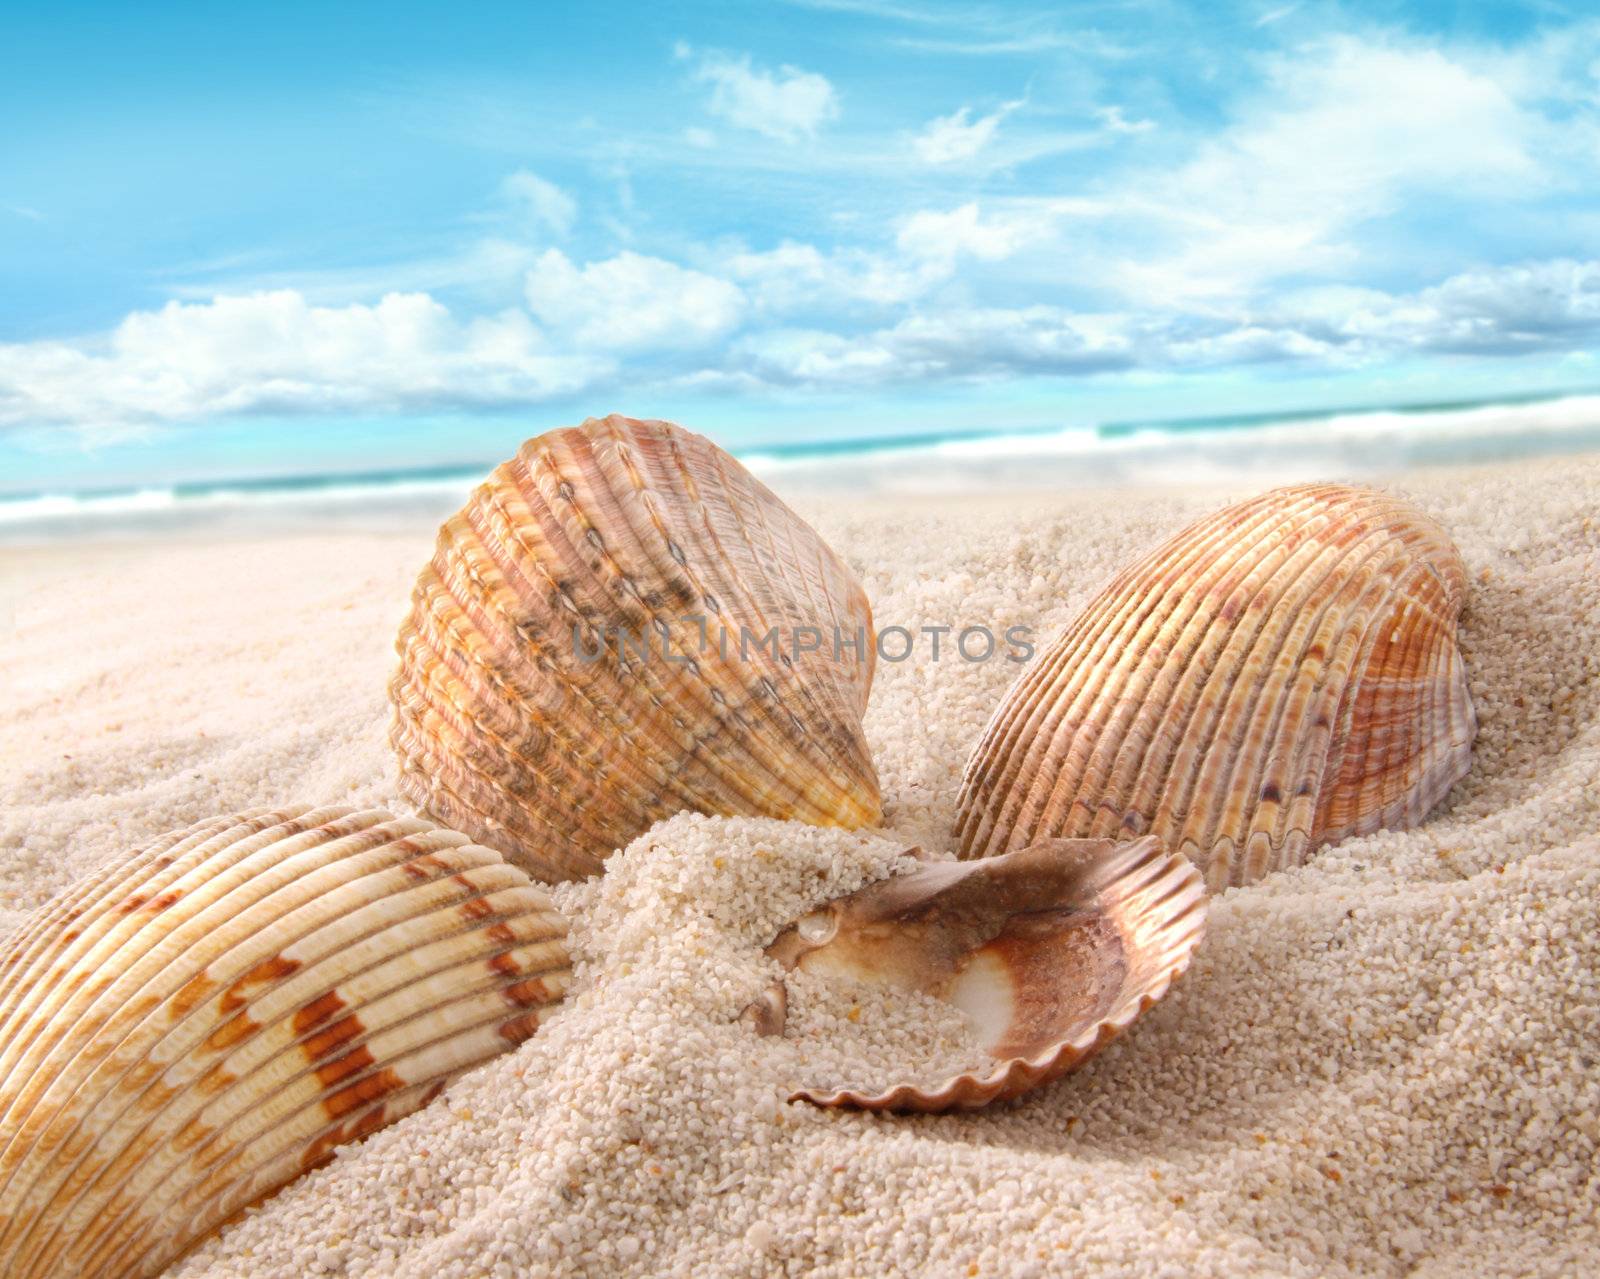 Seashells in the sand at the beach by Sandralise